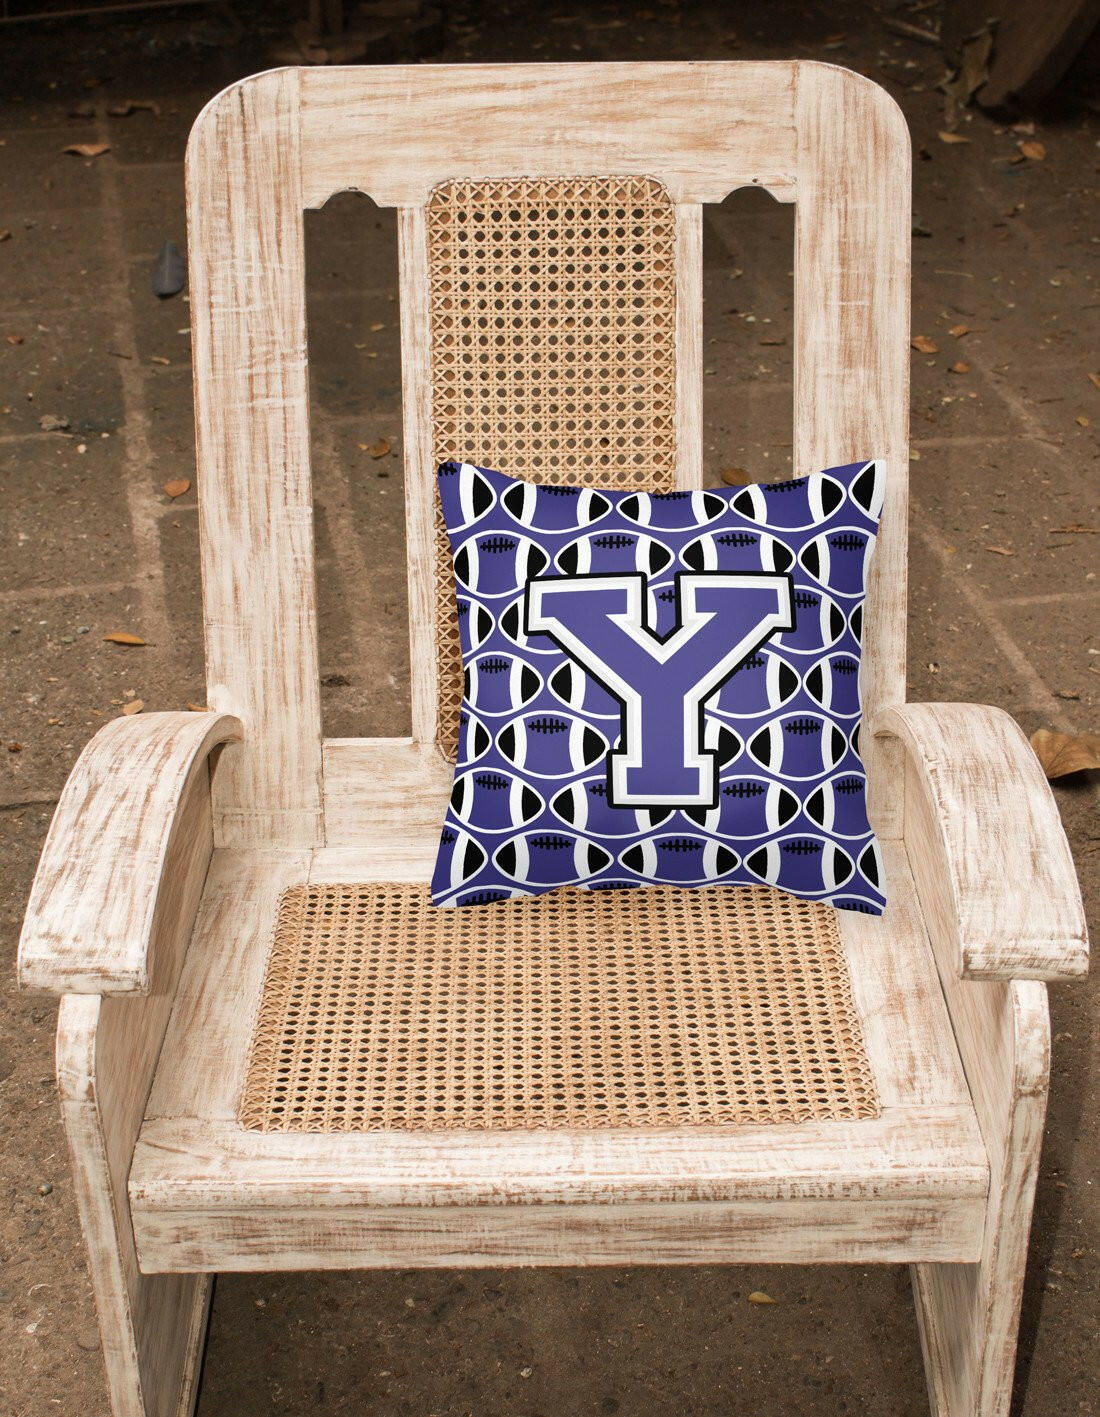 Letter Y Football Purple and White Fabric Decorative Pillow CJ1068-YPW1414 by Caroline's Treasures